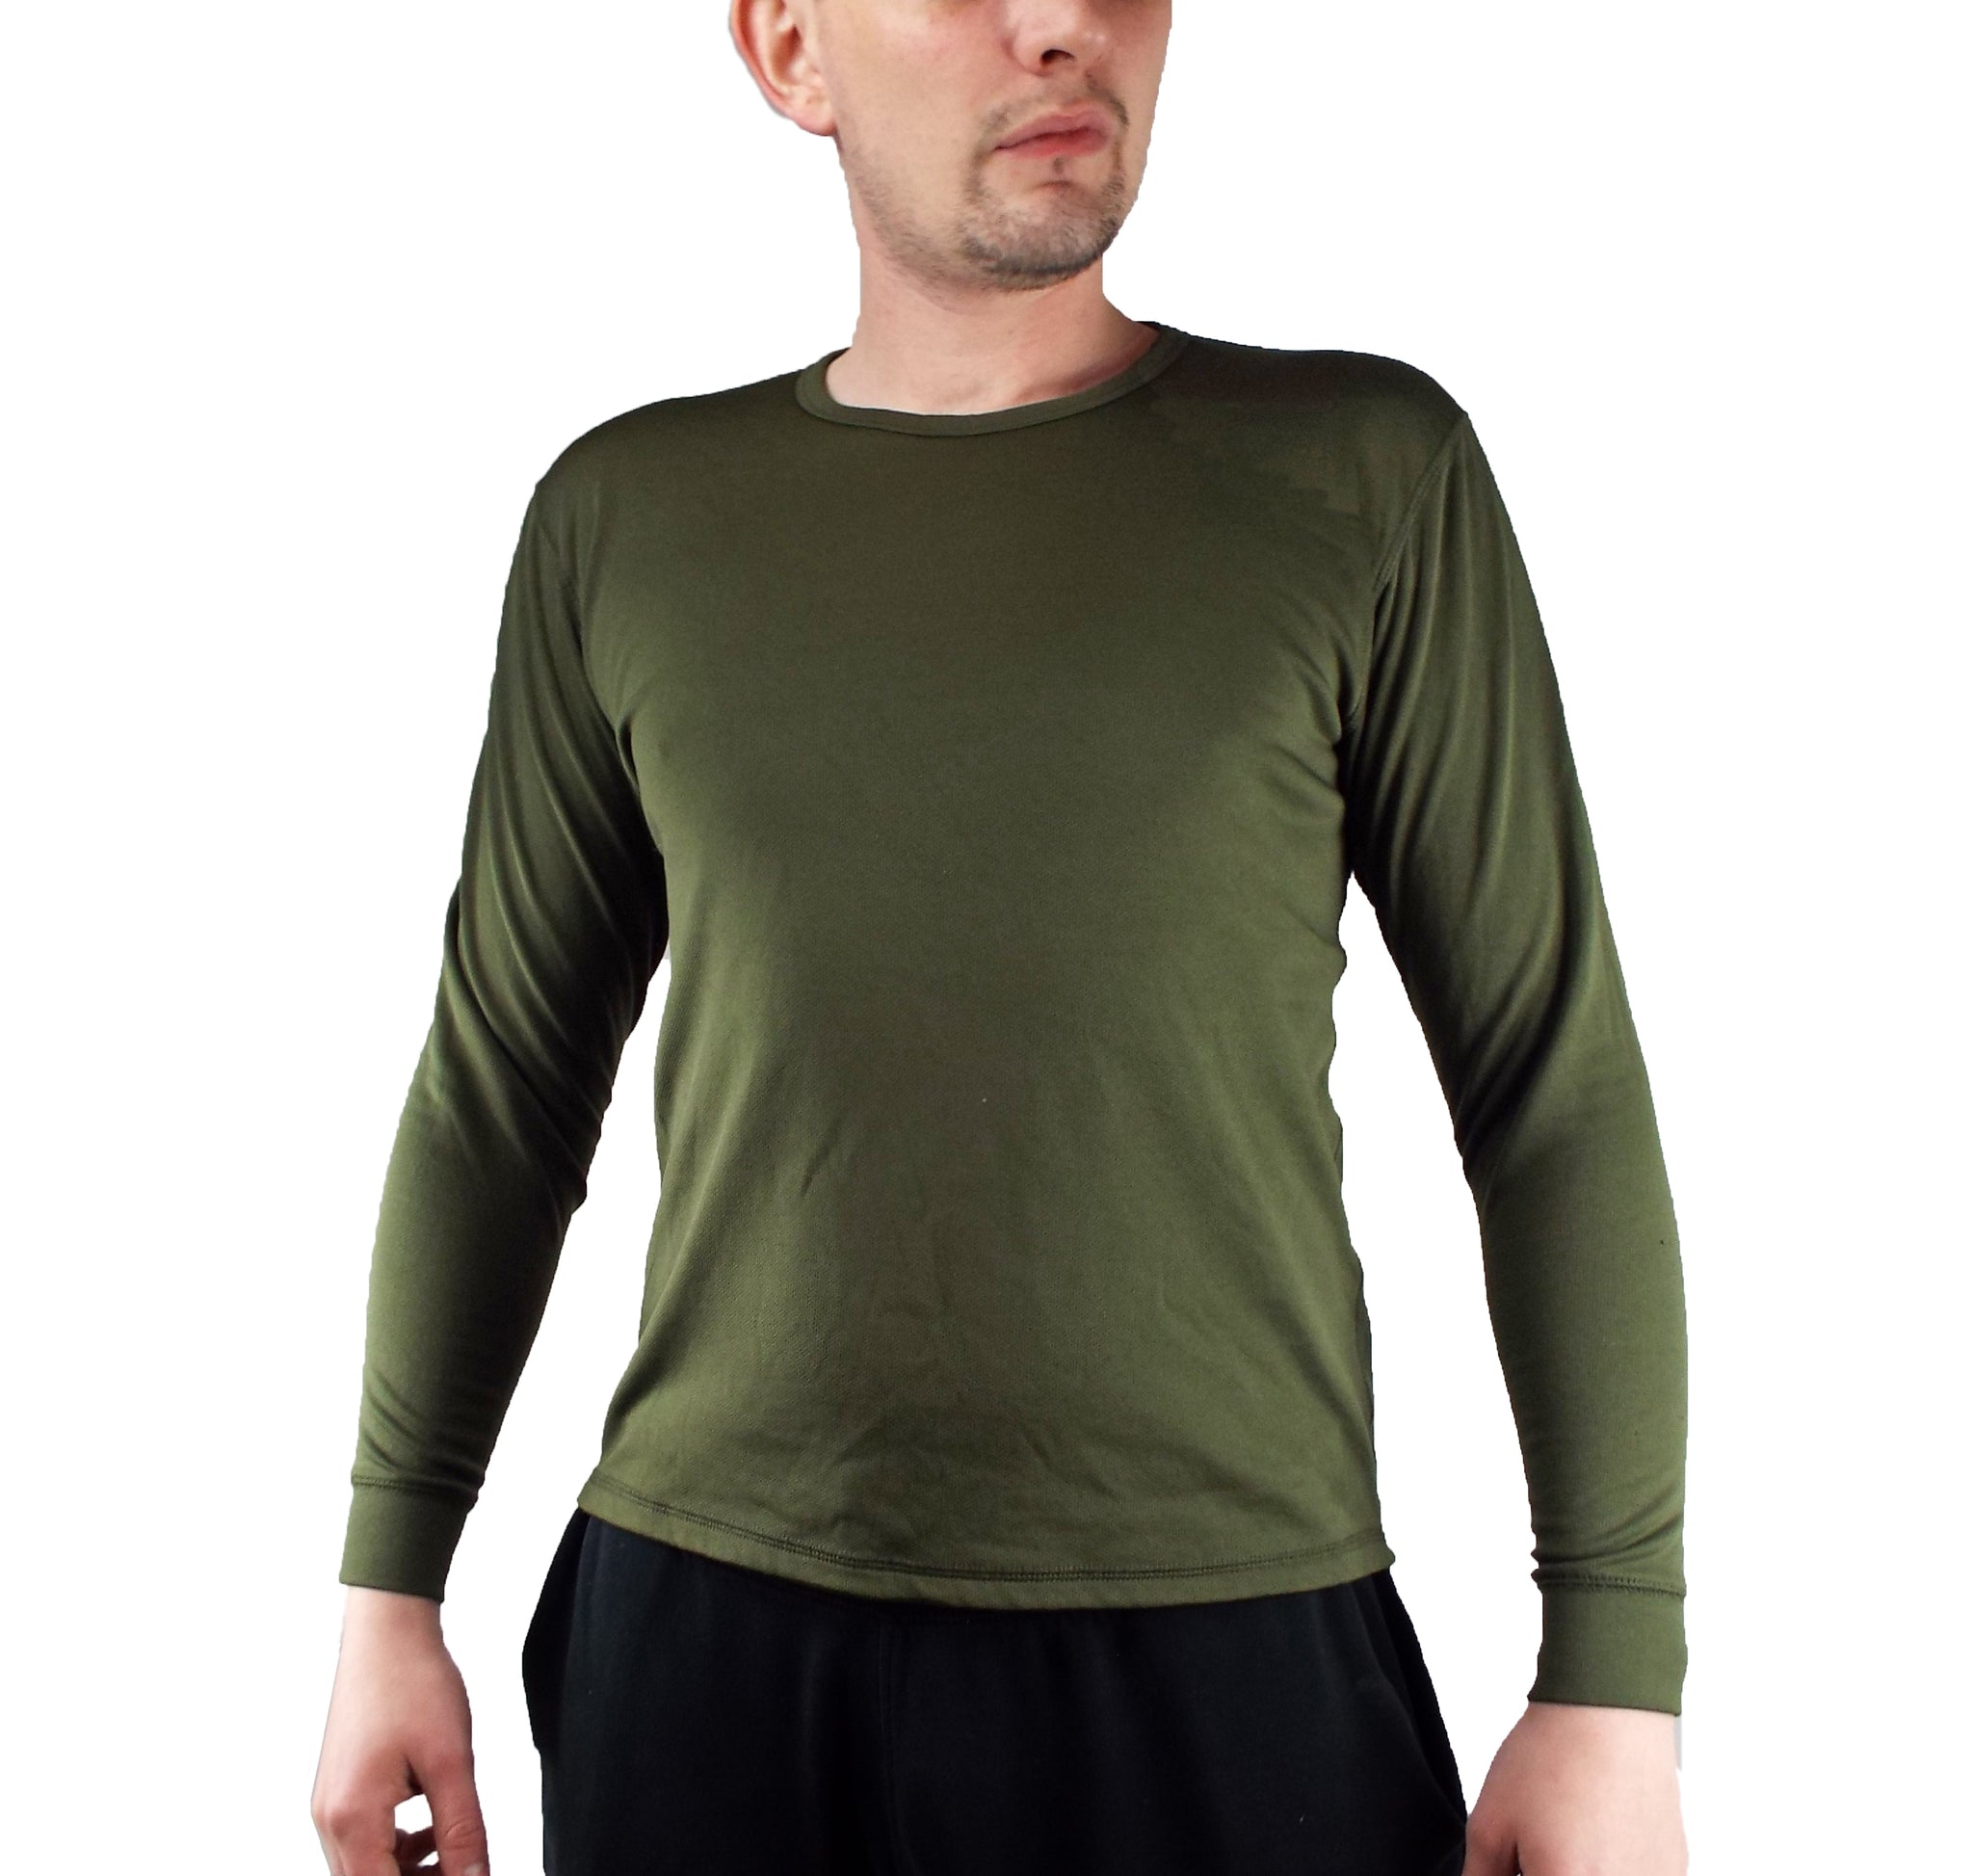 British Army - Grade 1 - Long Sleeve Thermal Top - Forces Uniform